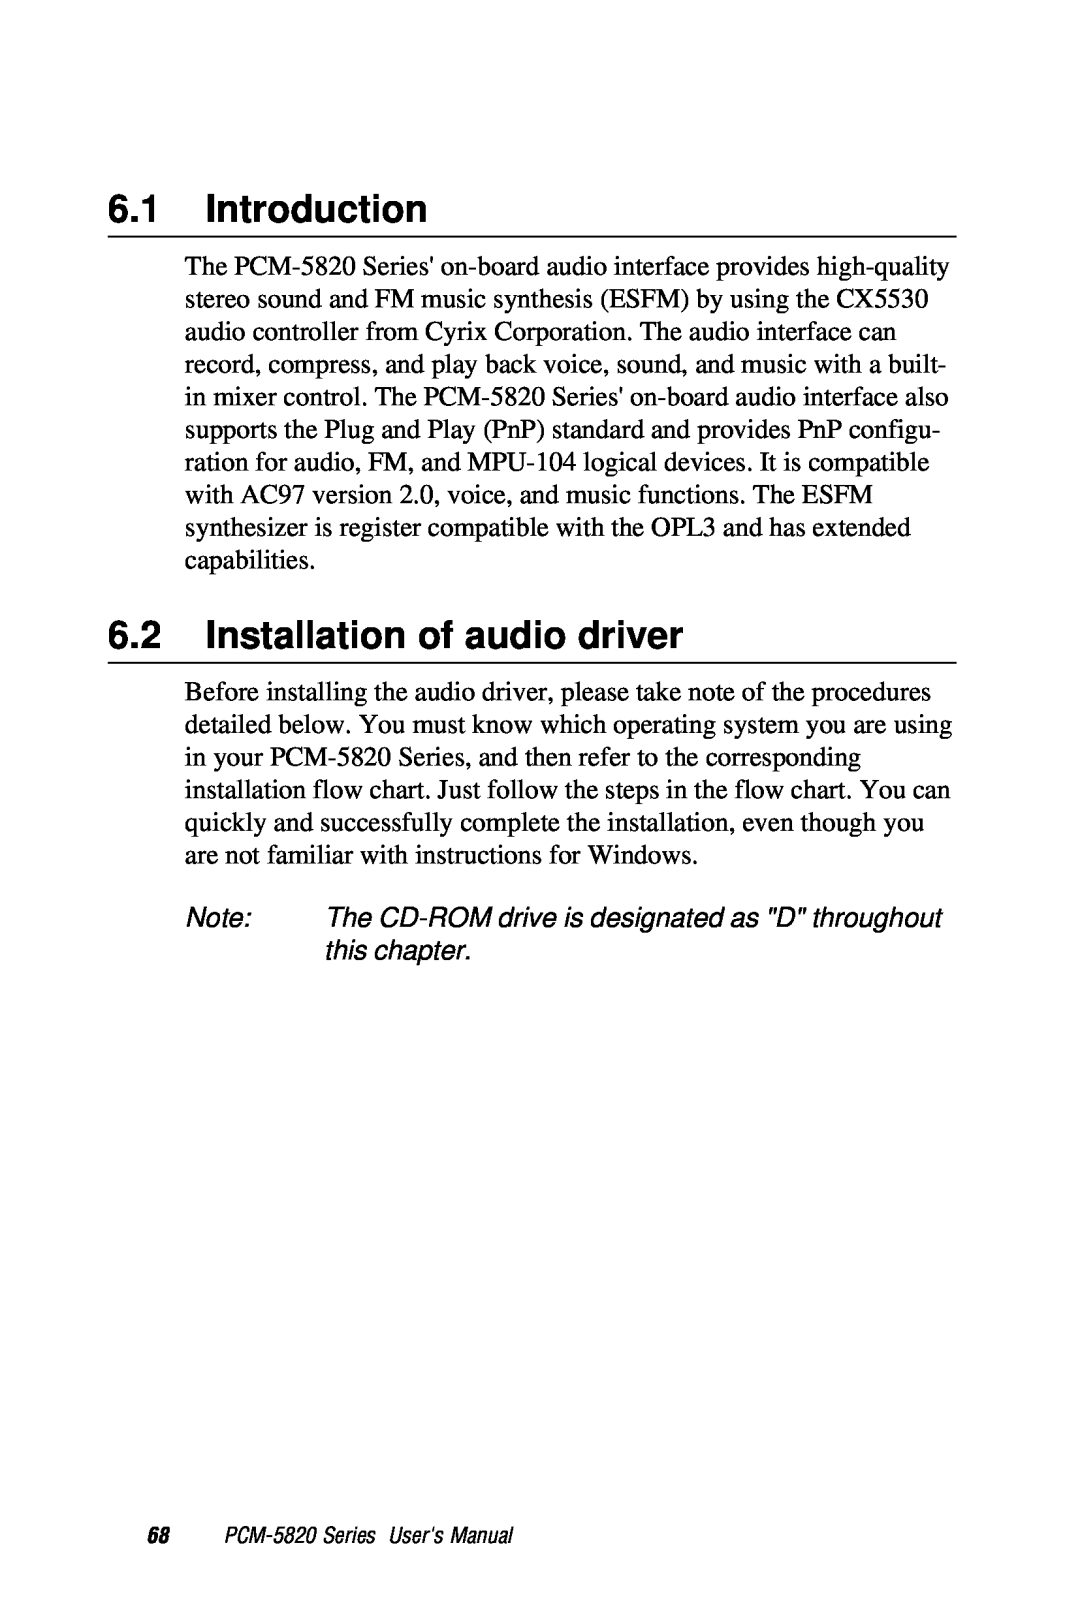 AMD PCM-5820 Introduction, Installation of audio driver, The CD-ROM drive is designated as D throughout, this chapter 